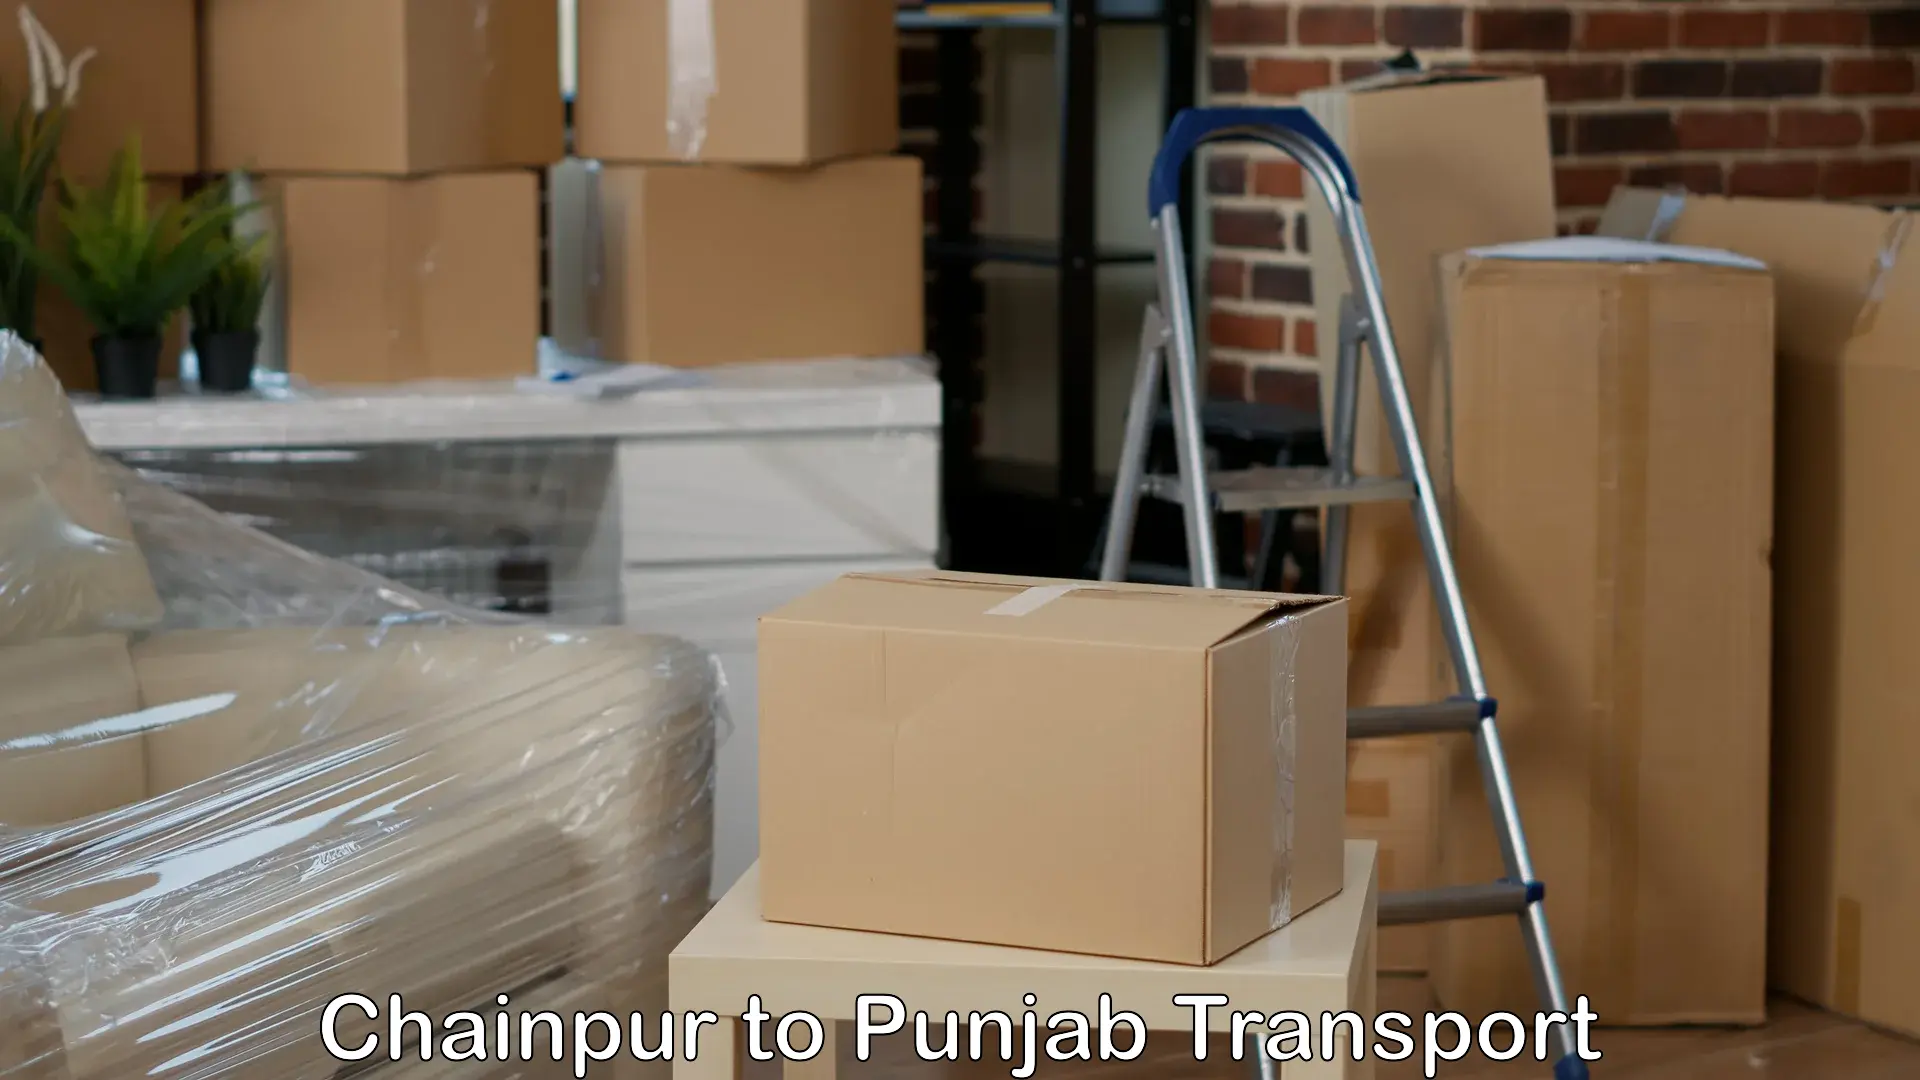 Daily parcel service transport Chainpur to Patran